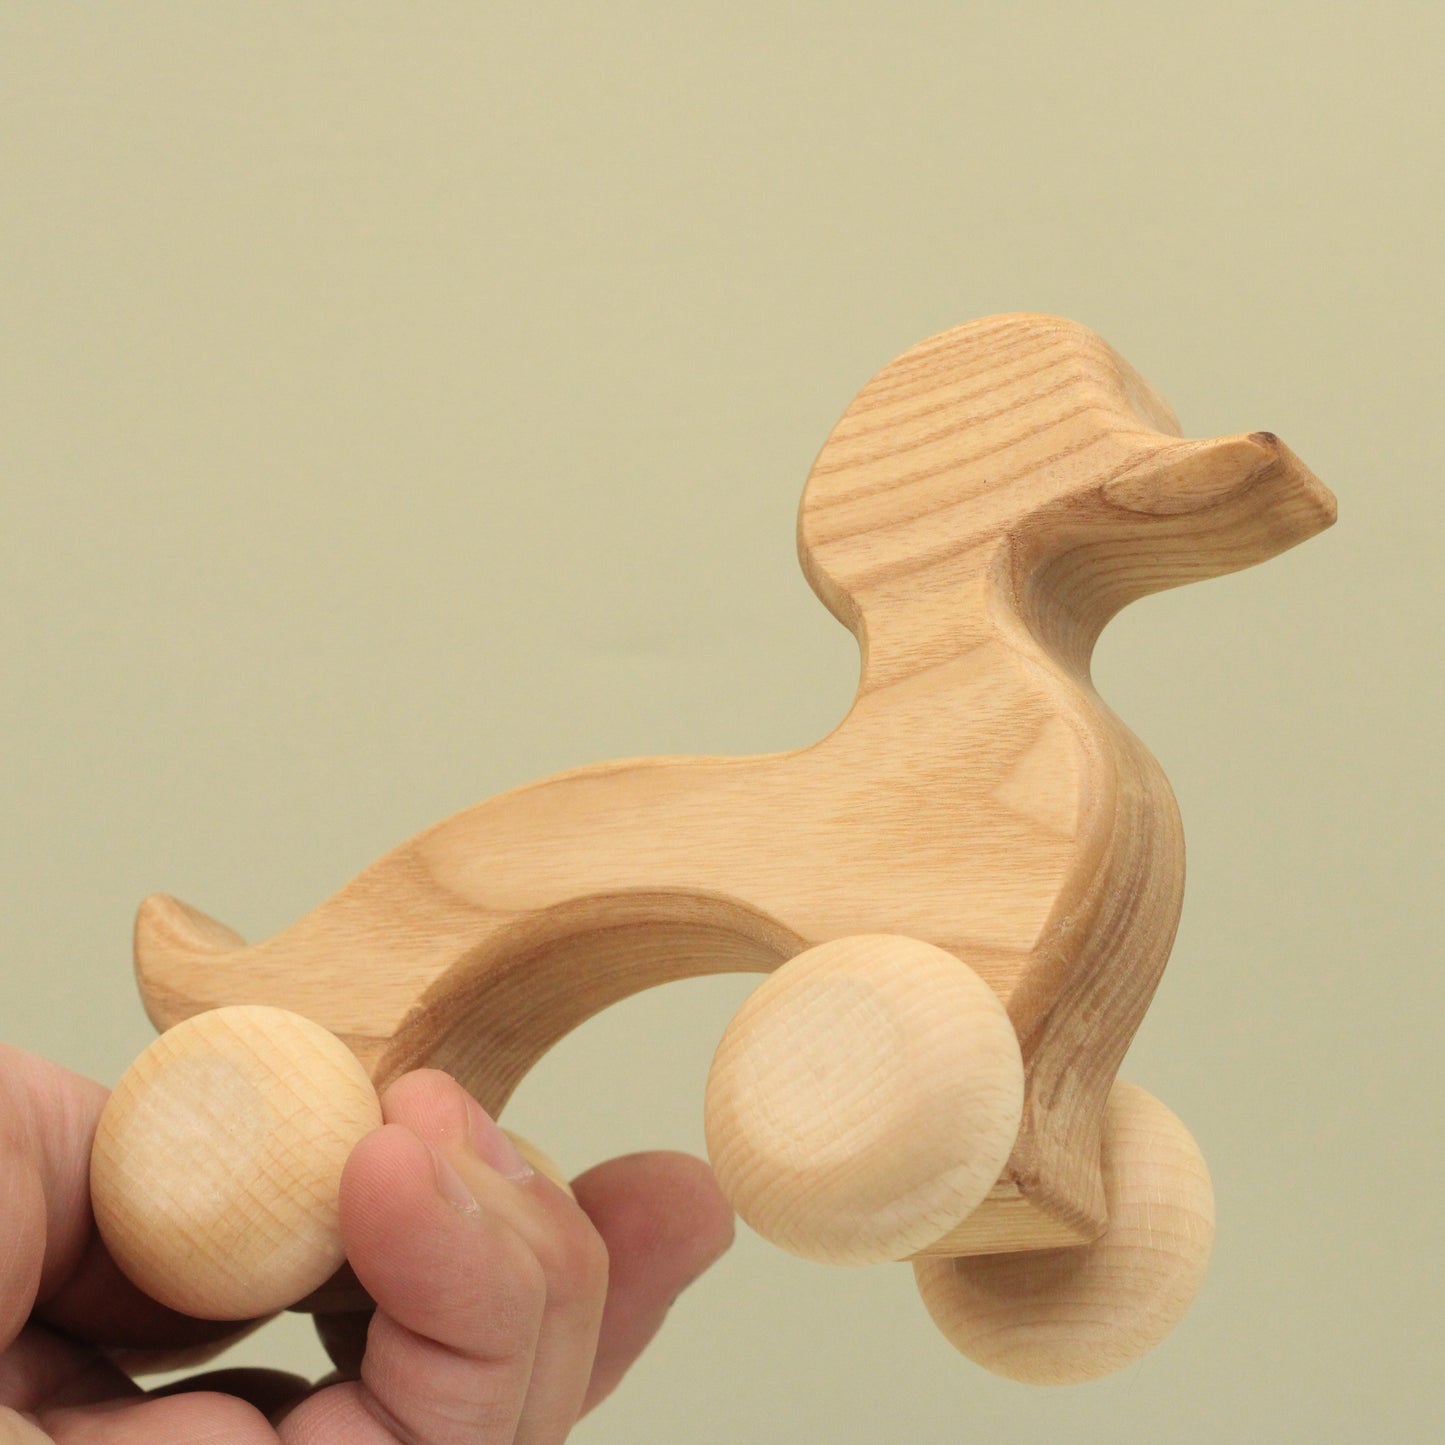 Lotes Toys Wooden Duck WA08